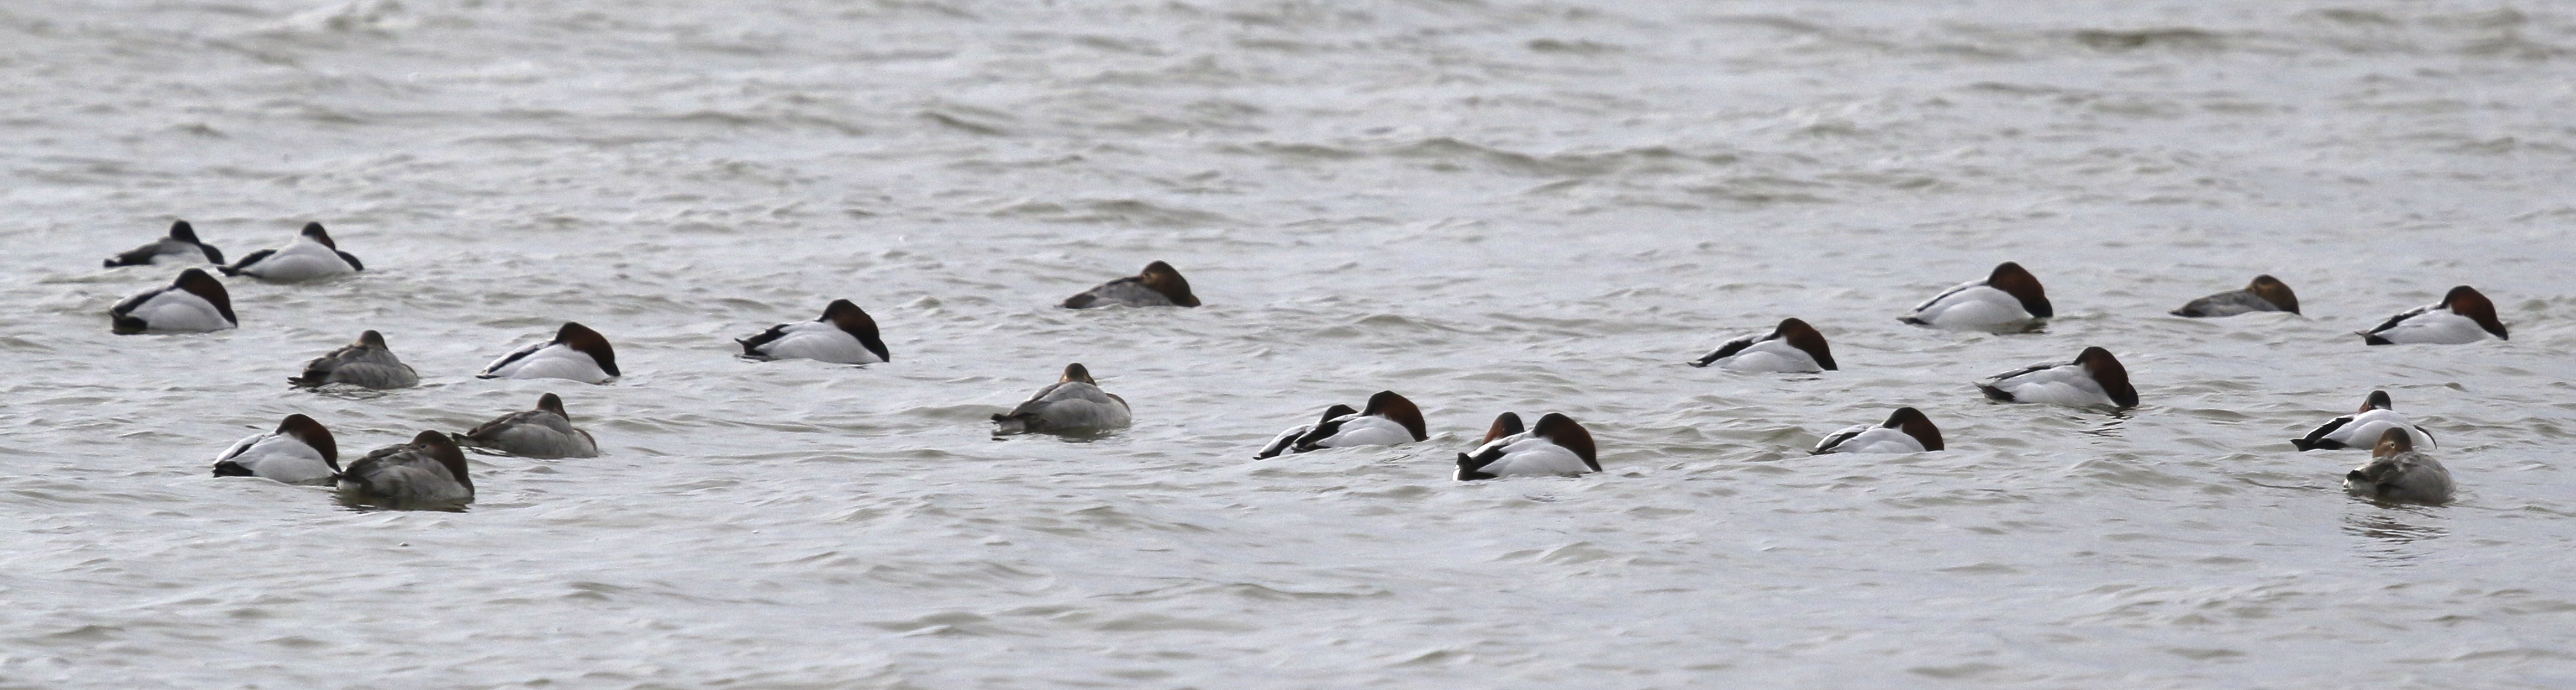 Canvasbacks all tucked in, Piermont Pier 1/9/16.~